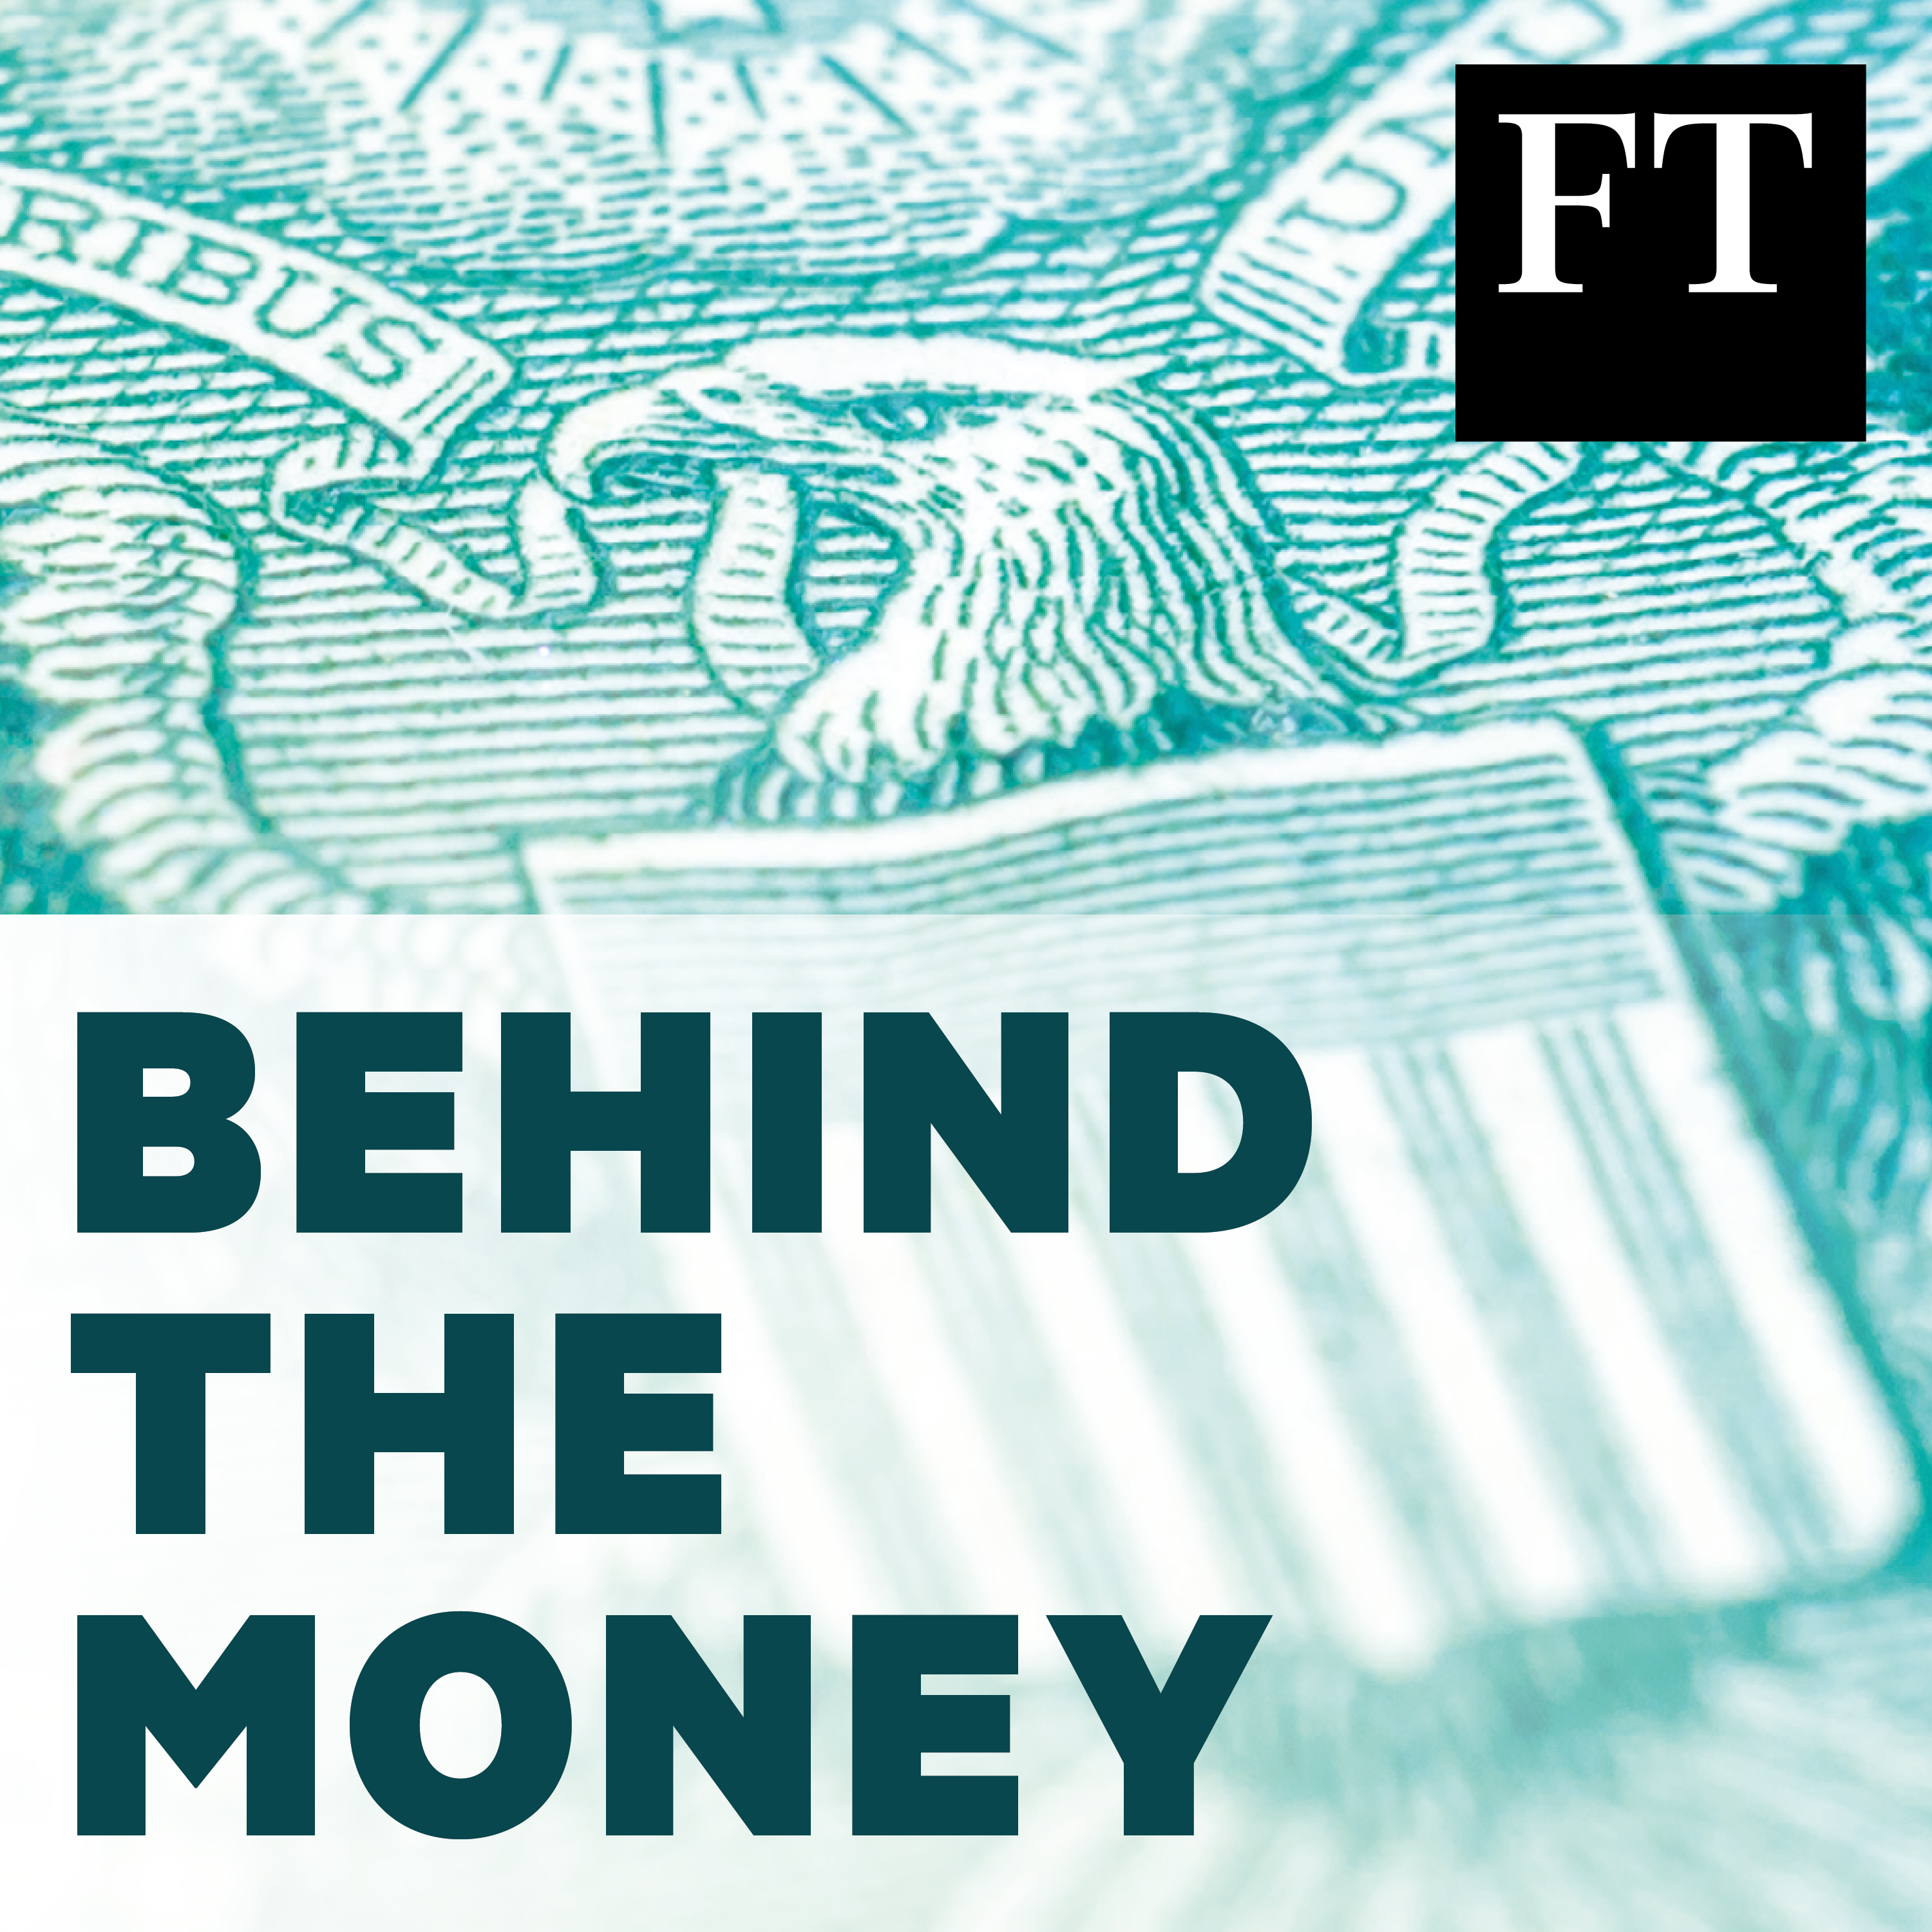 Introducing Behind the Money: Barclays and the legal fight over a ’controlling mind’